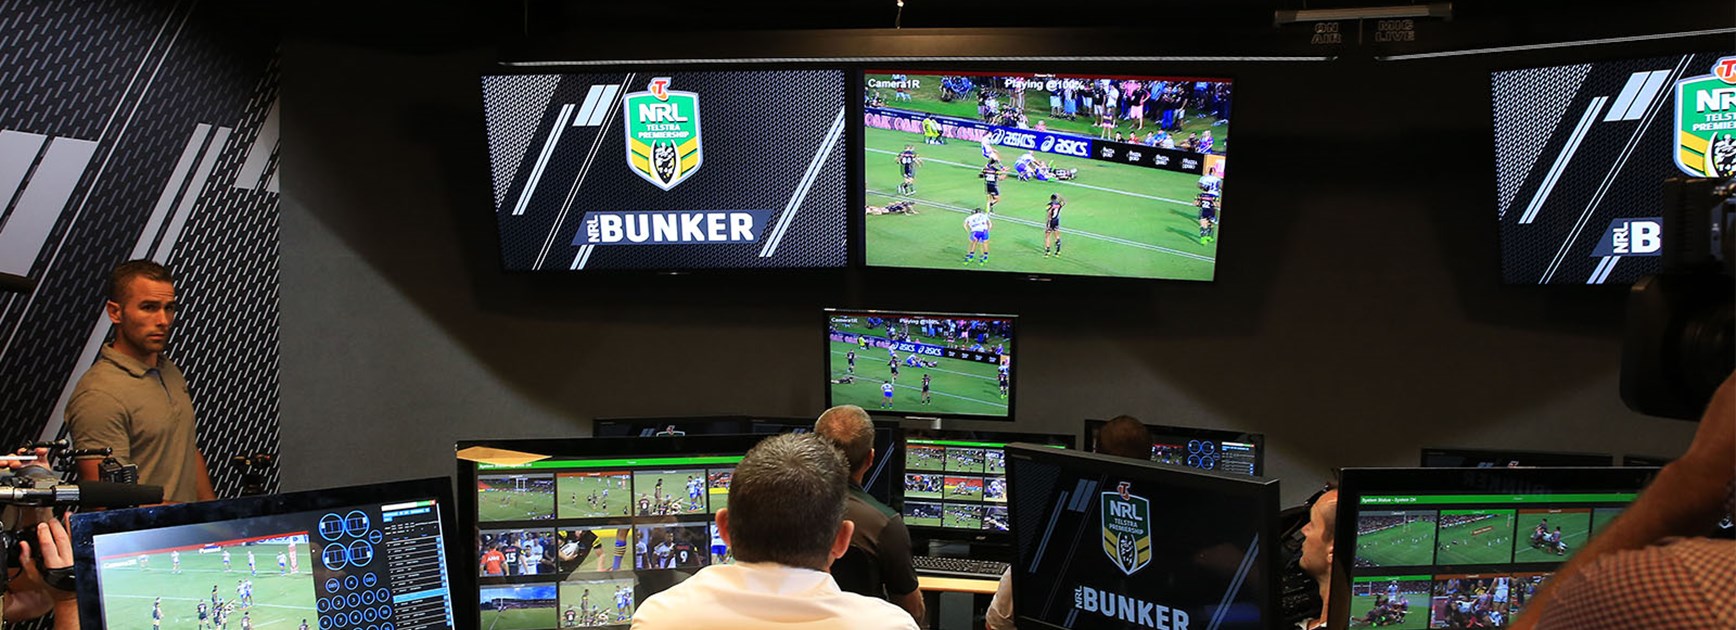 A demonstration of the NRL Bunker in action.